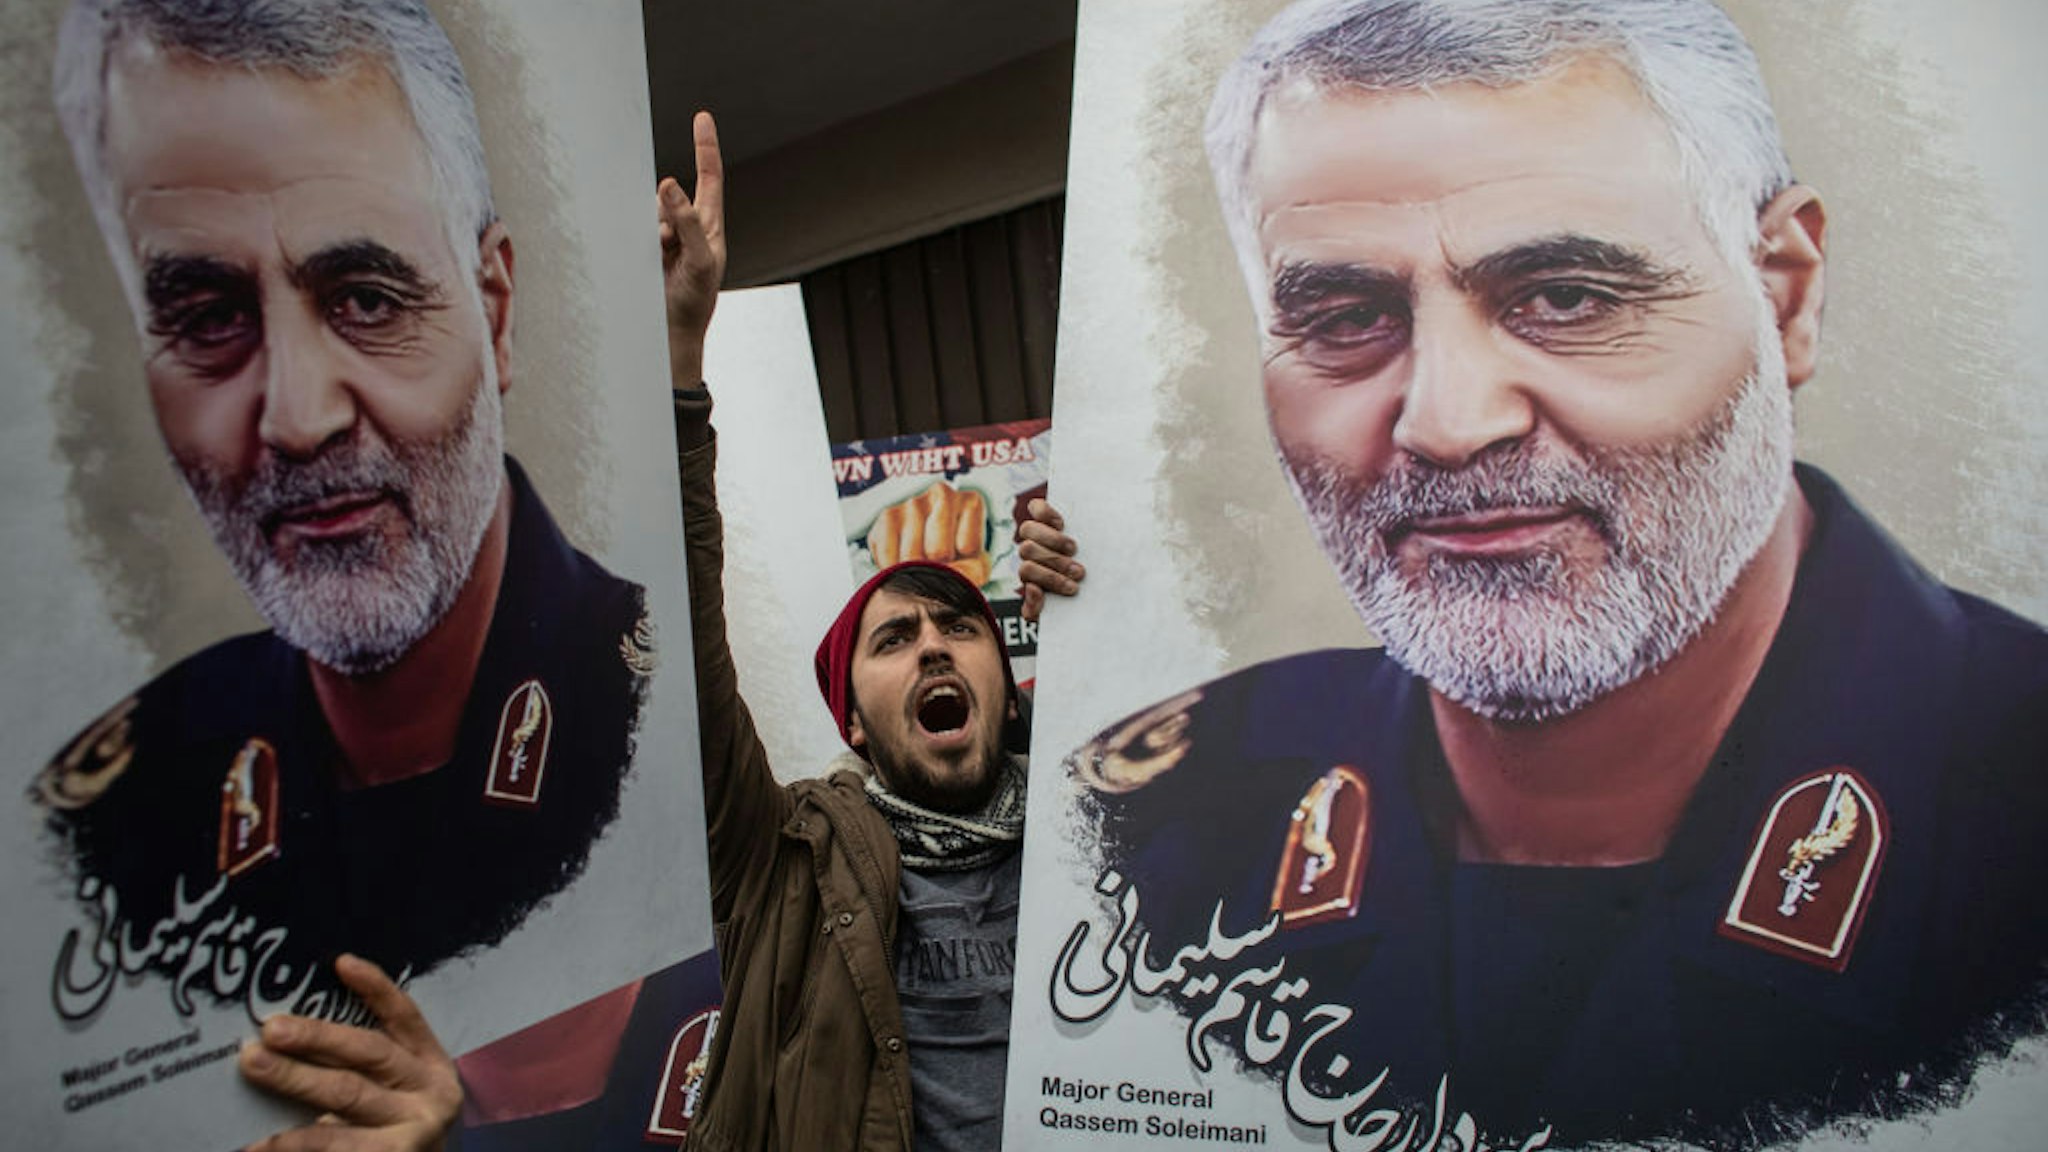 ISTANBUL, TURKEY - JANUARY 05: People hold posters showing the portrait of Iranian Revolutionary Guard Major General Qassem Soleimani and chant slogans during a protest outside the U.S. Consulate on January 05, 2020 in Istanbul, Turkey. Major General Qassem Soleimani, was killed by a U.S. drone strike outside the Baghdad Airport on January 3. Since the incident, tensions have risen across the Middle East. (Photo by Chris McGrath/Getty Images)